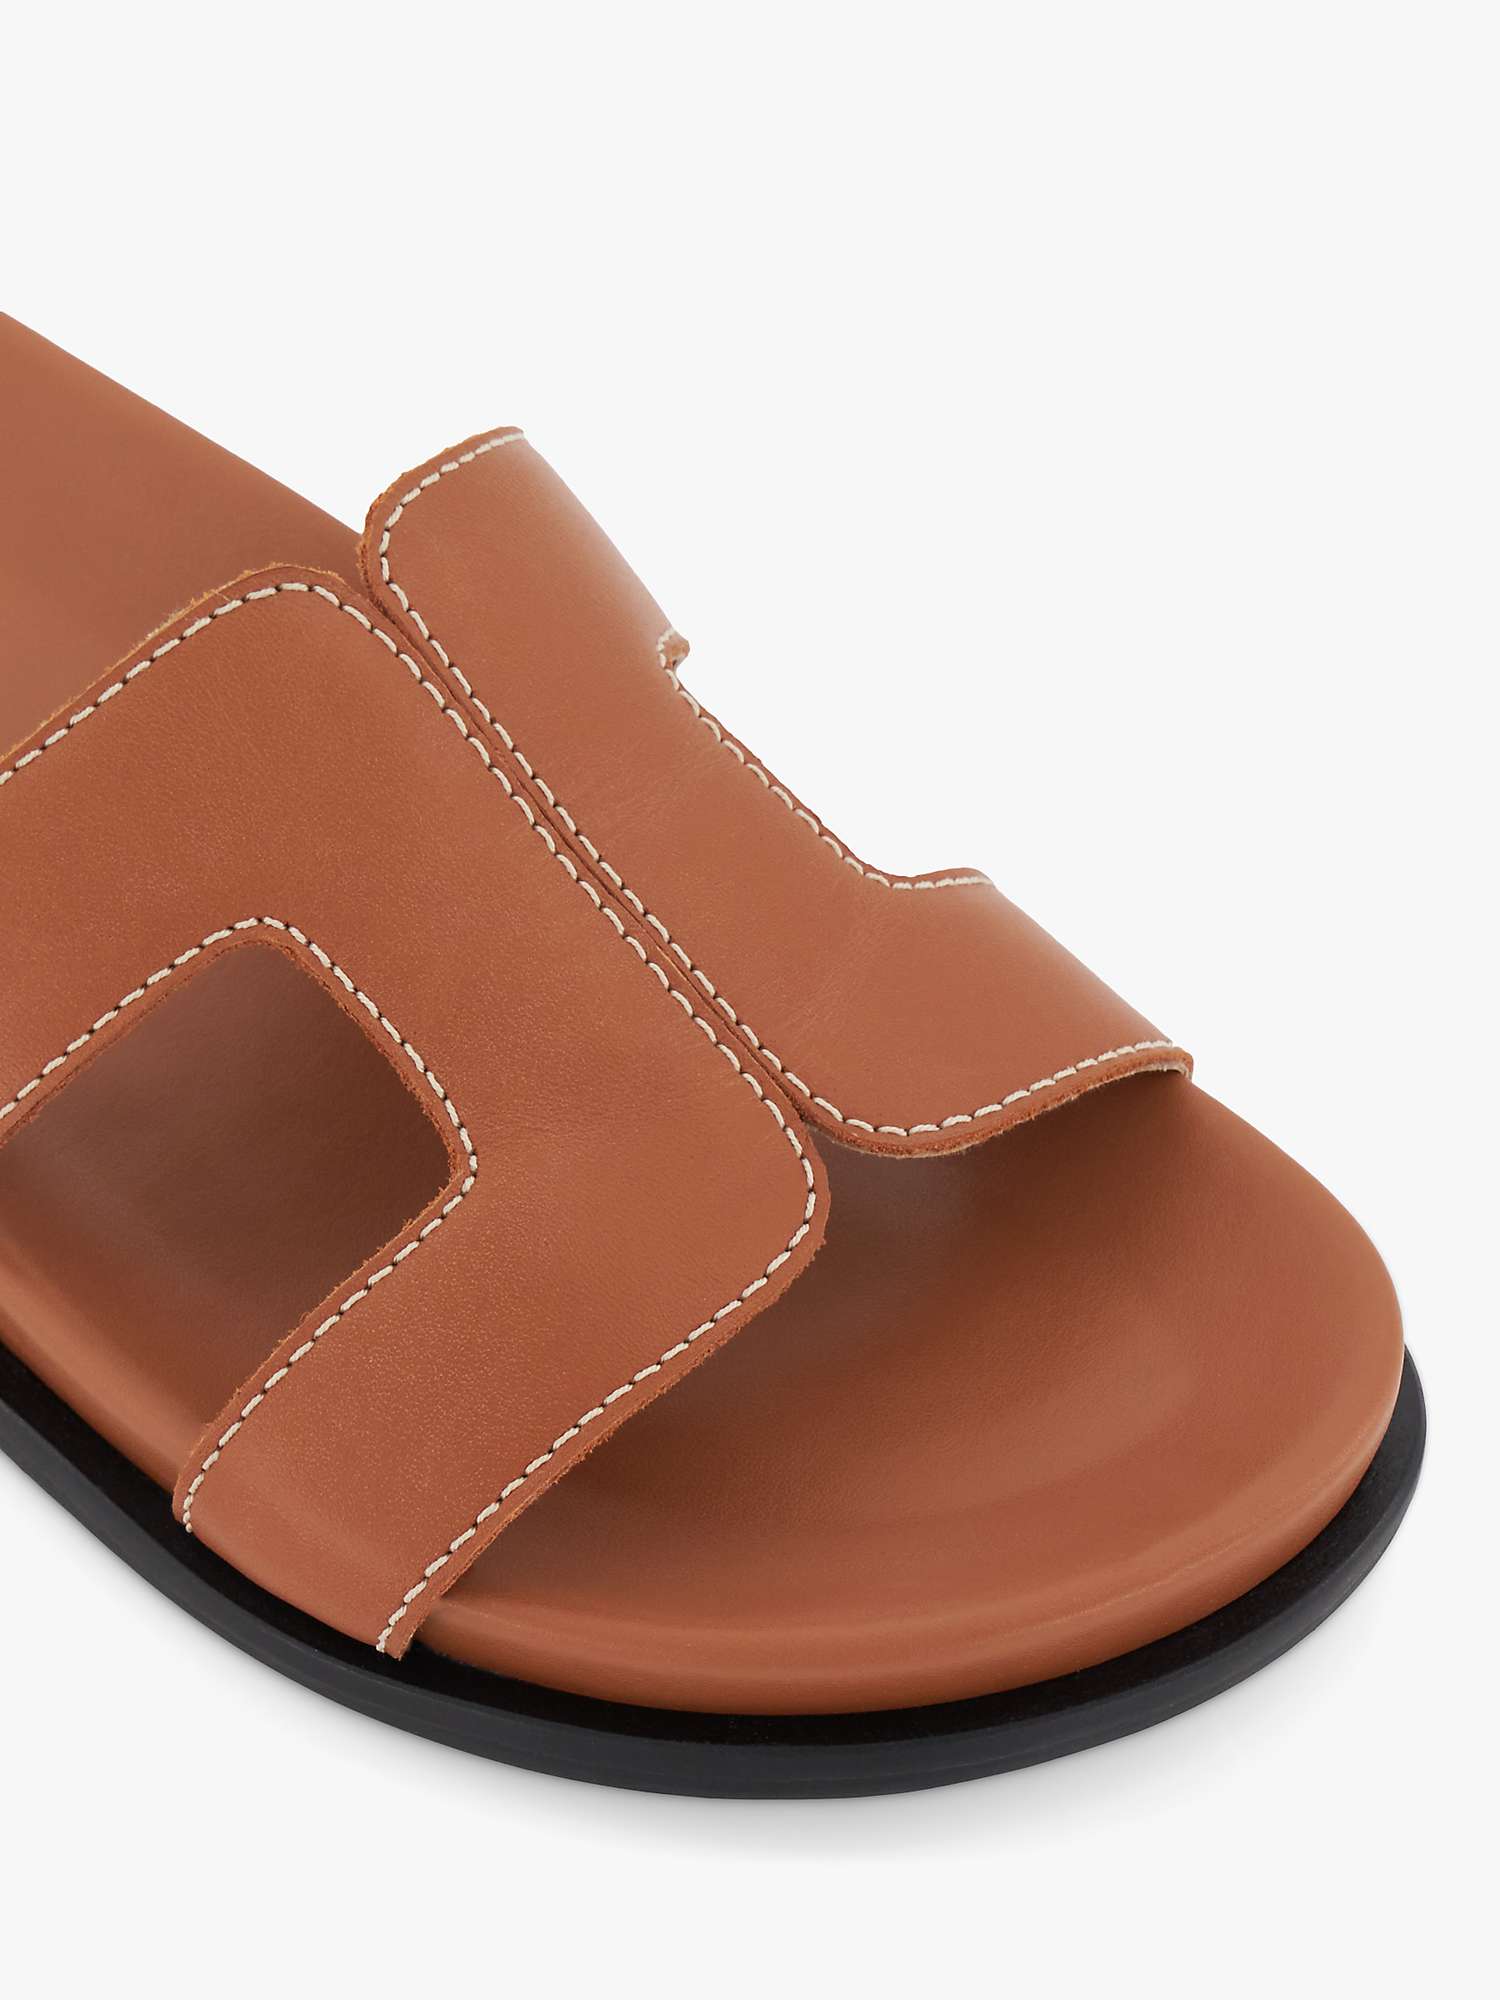 Buy Dune Wide Fit Loupa Leather Sandals, Tan Online at johnlewis.com